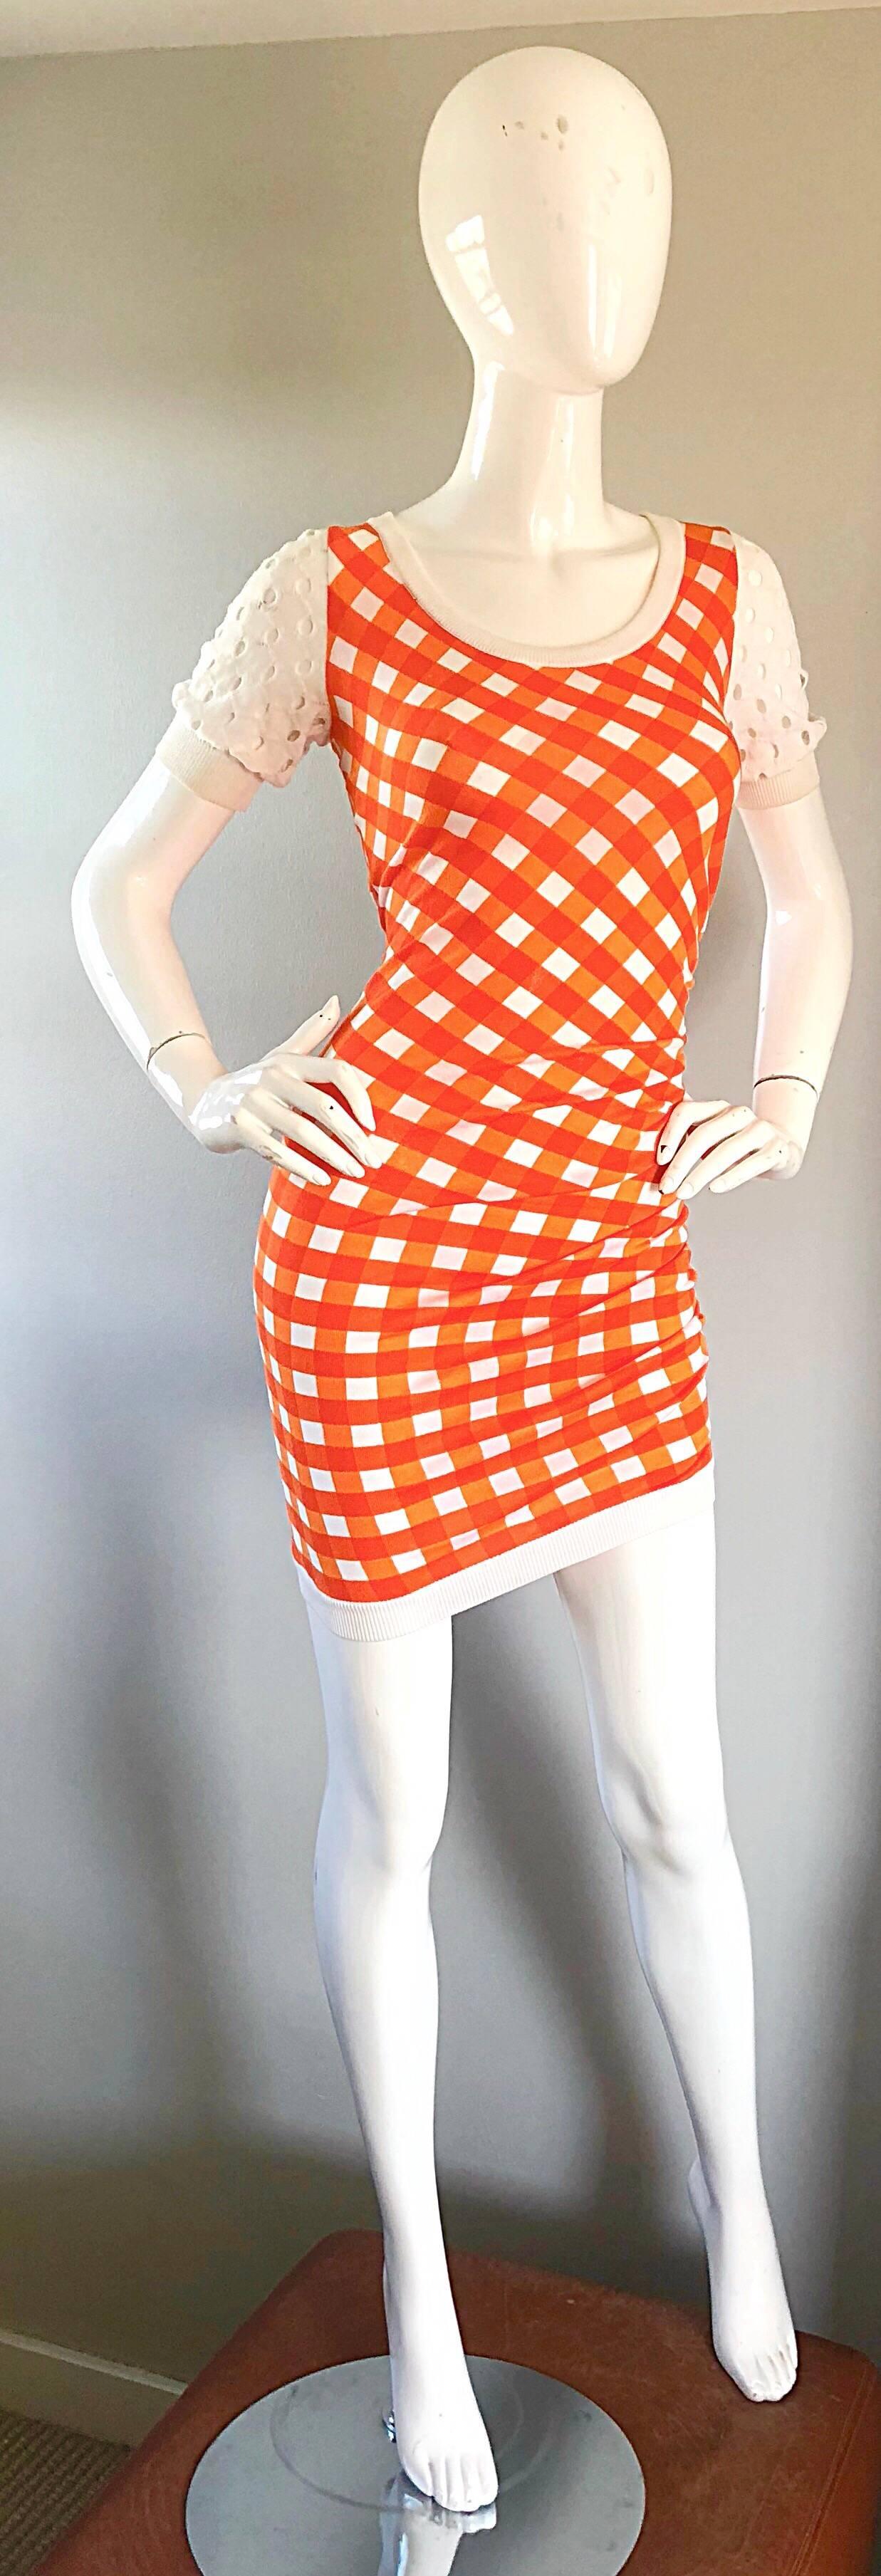 Red Vintage Moschino Cheap & Chic 1990s Orange + White Gingham Bodycon 90s Dress